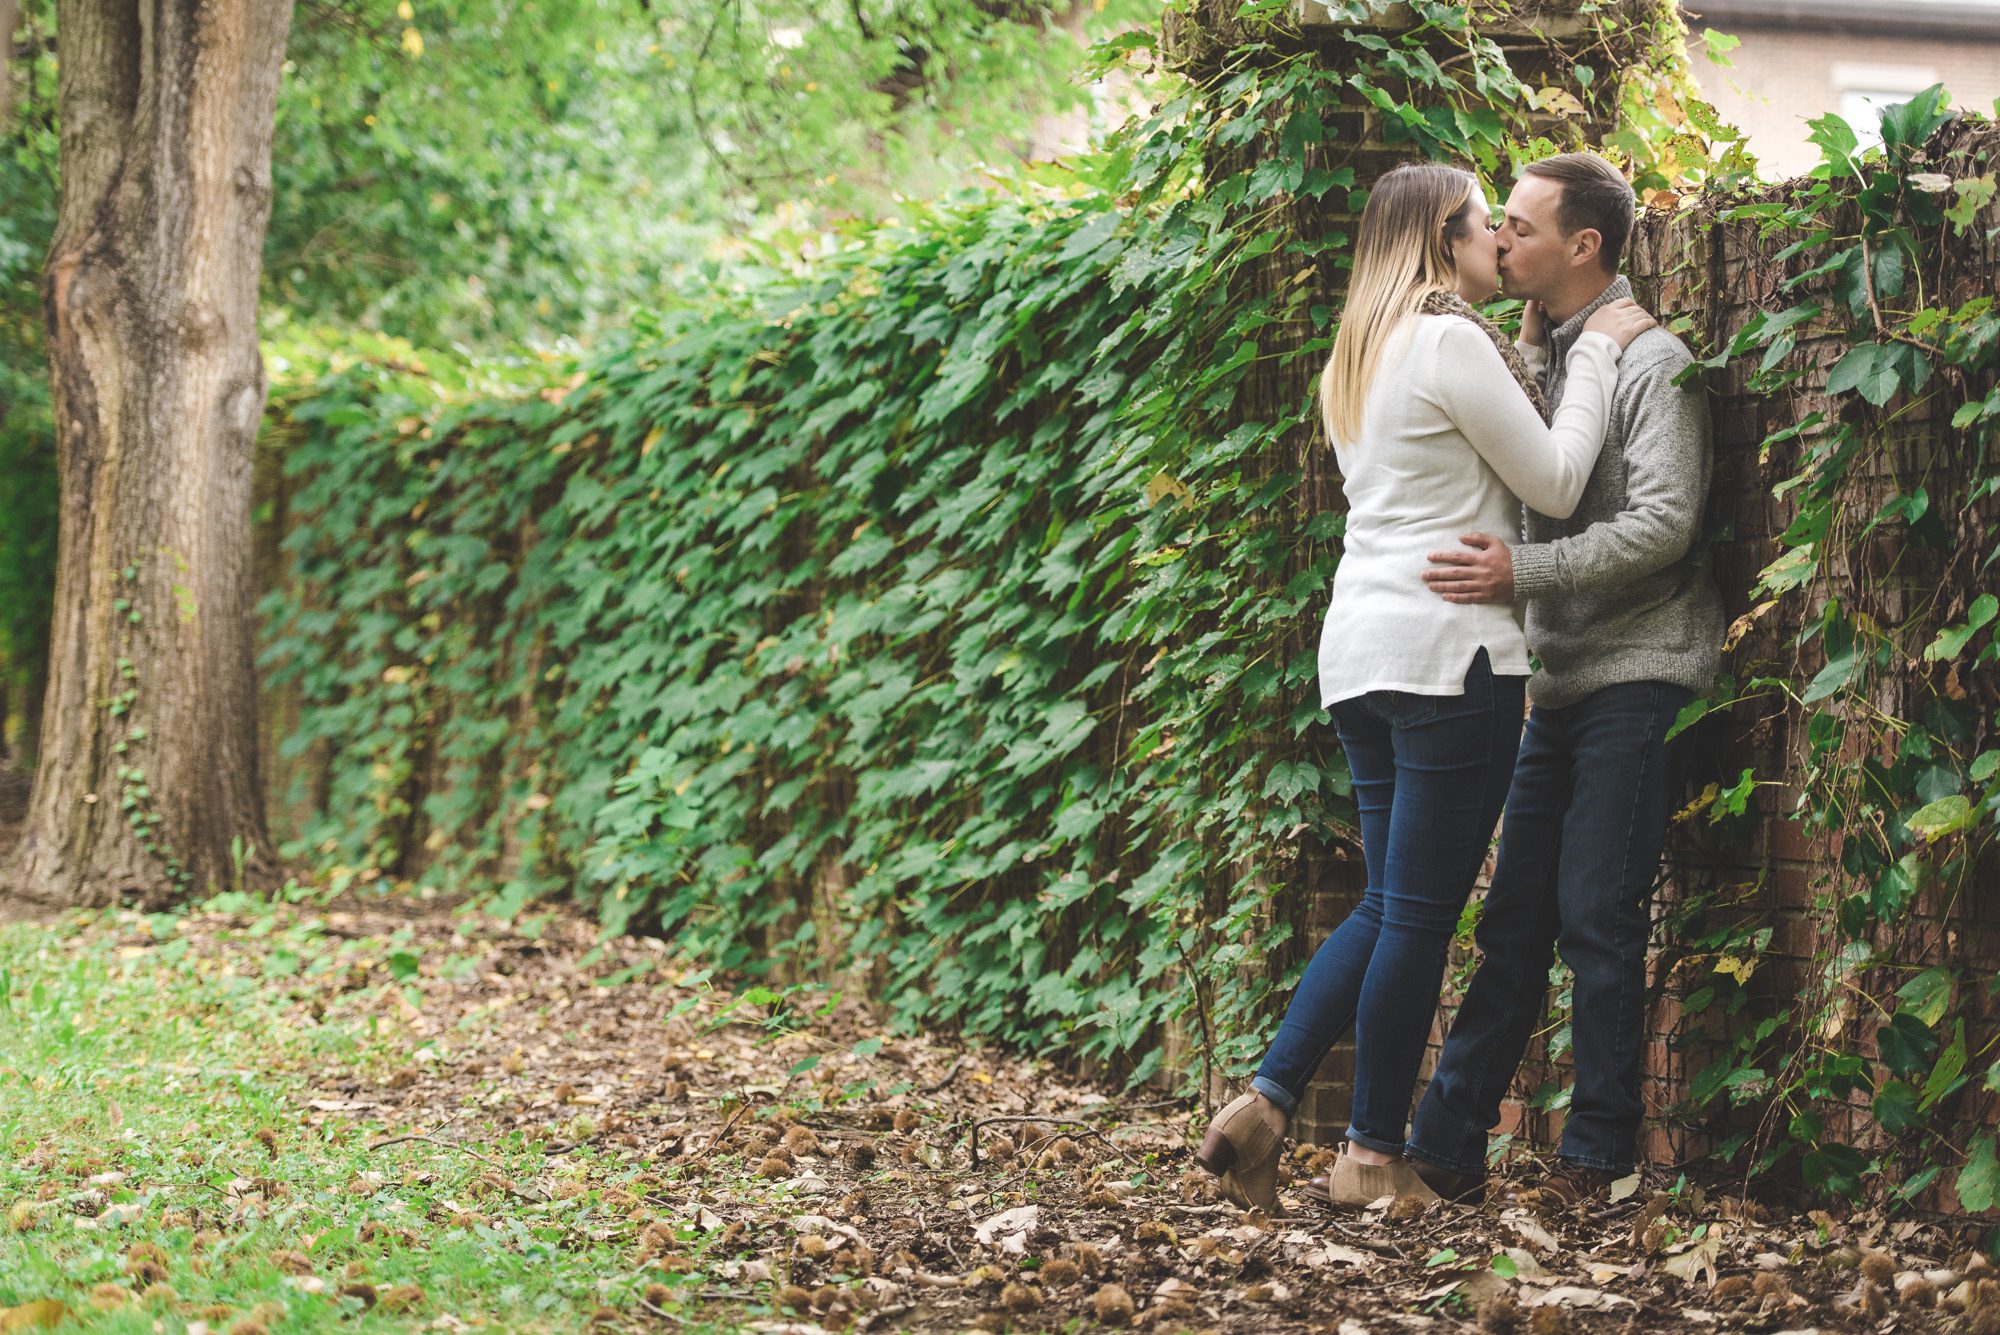 allegheny commons park engagement photography session couple